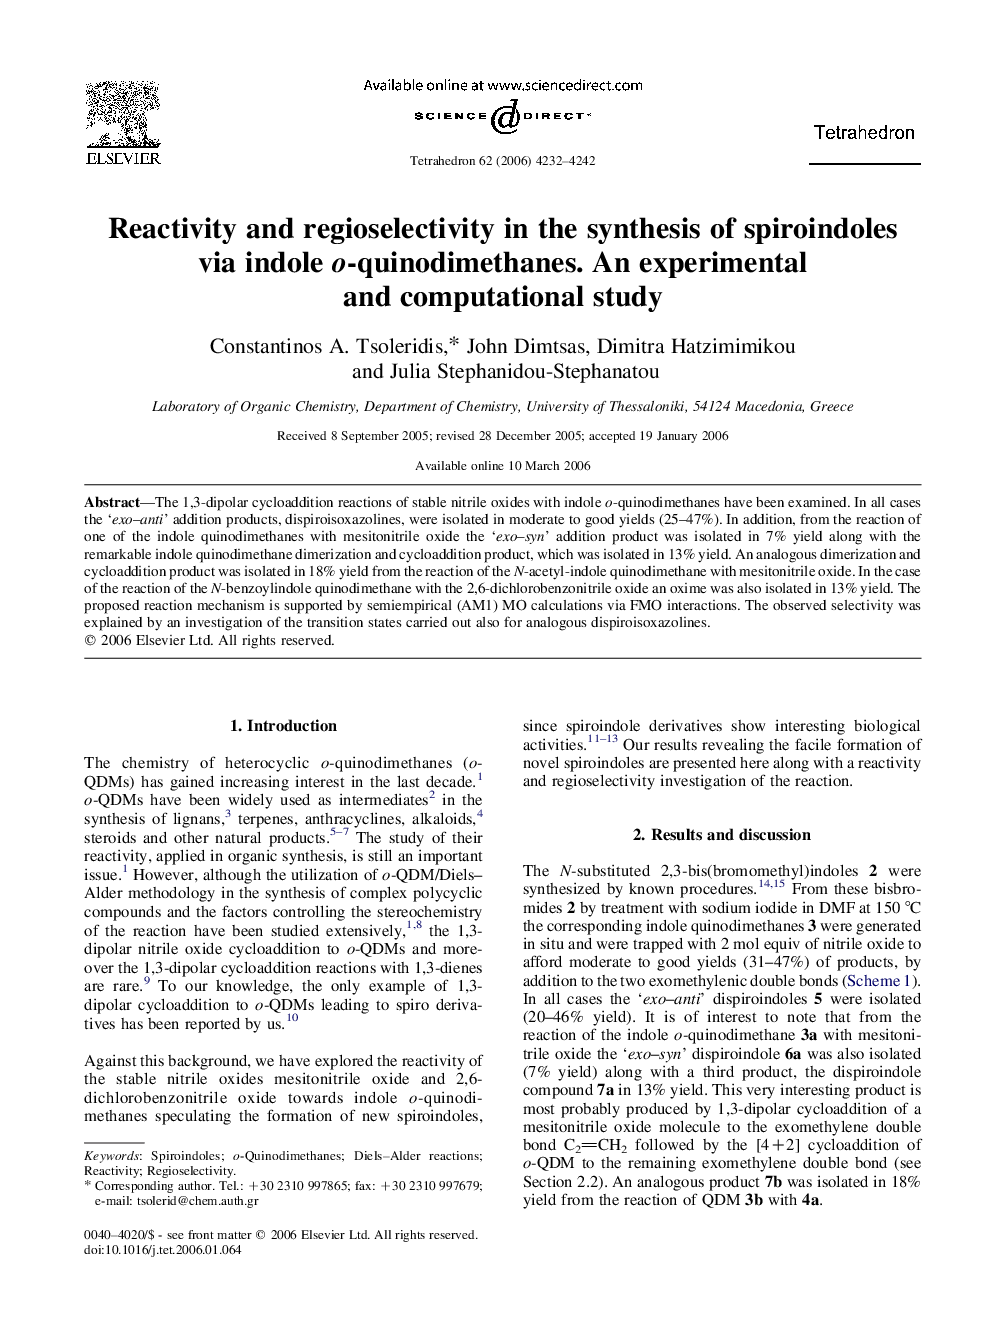 Reactivity and regioselectivity in the synthesis of spiroindoles via indole o-quinodimethanes. An experimental and computational study